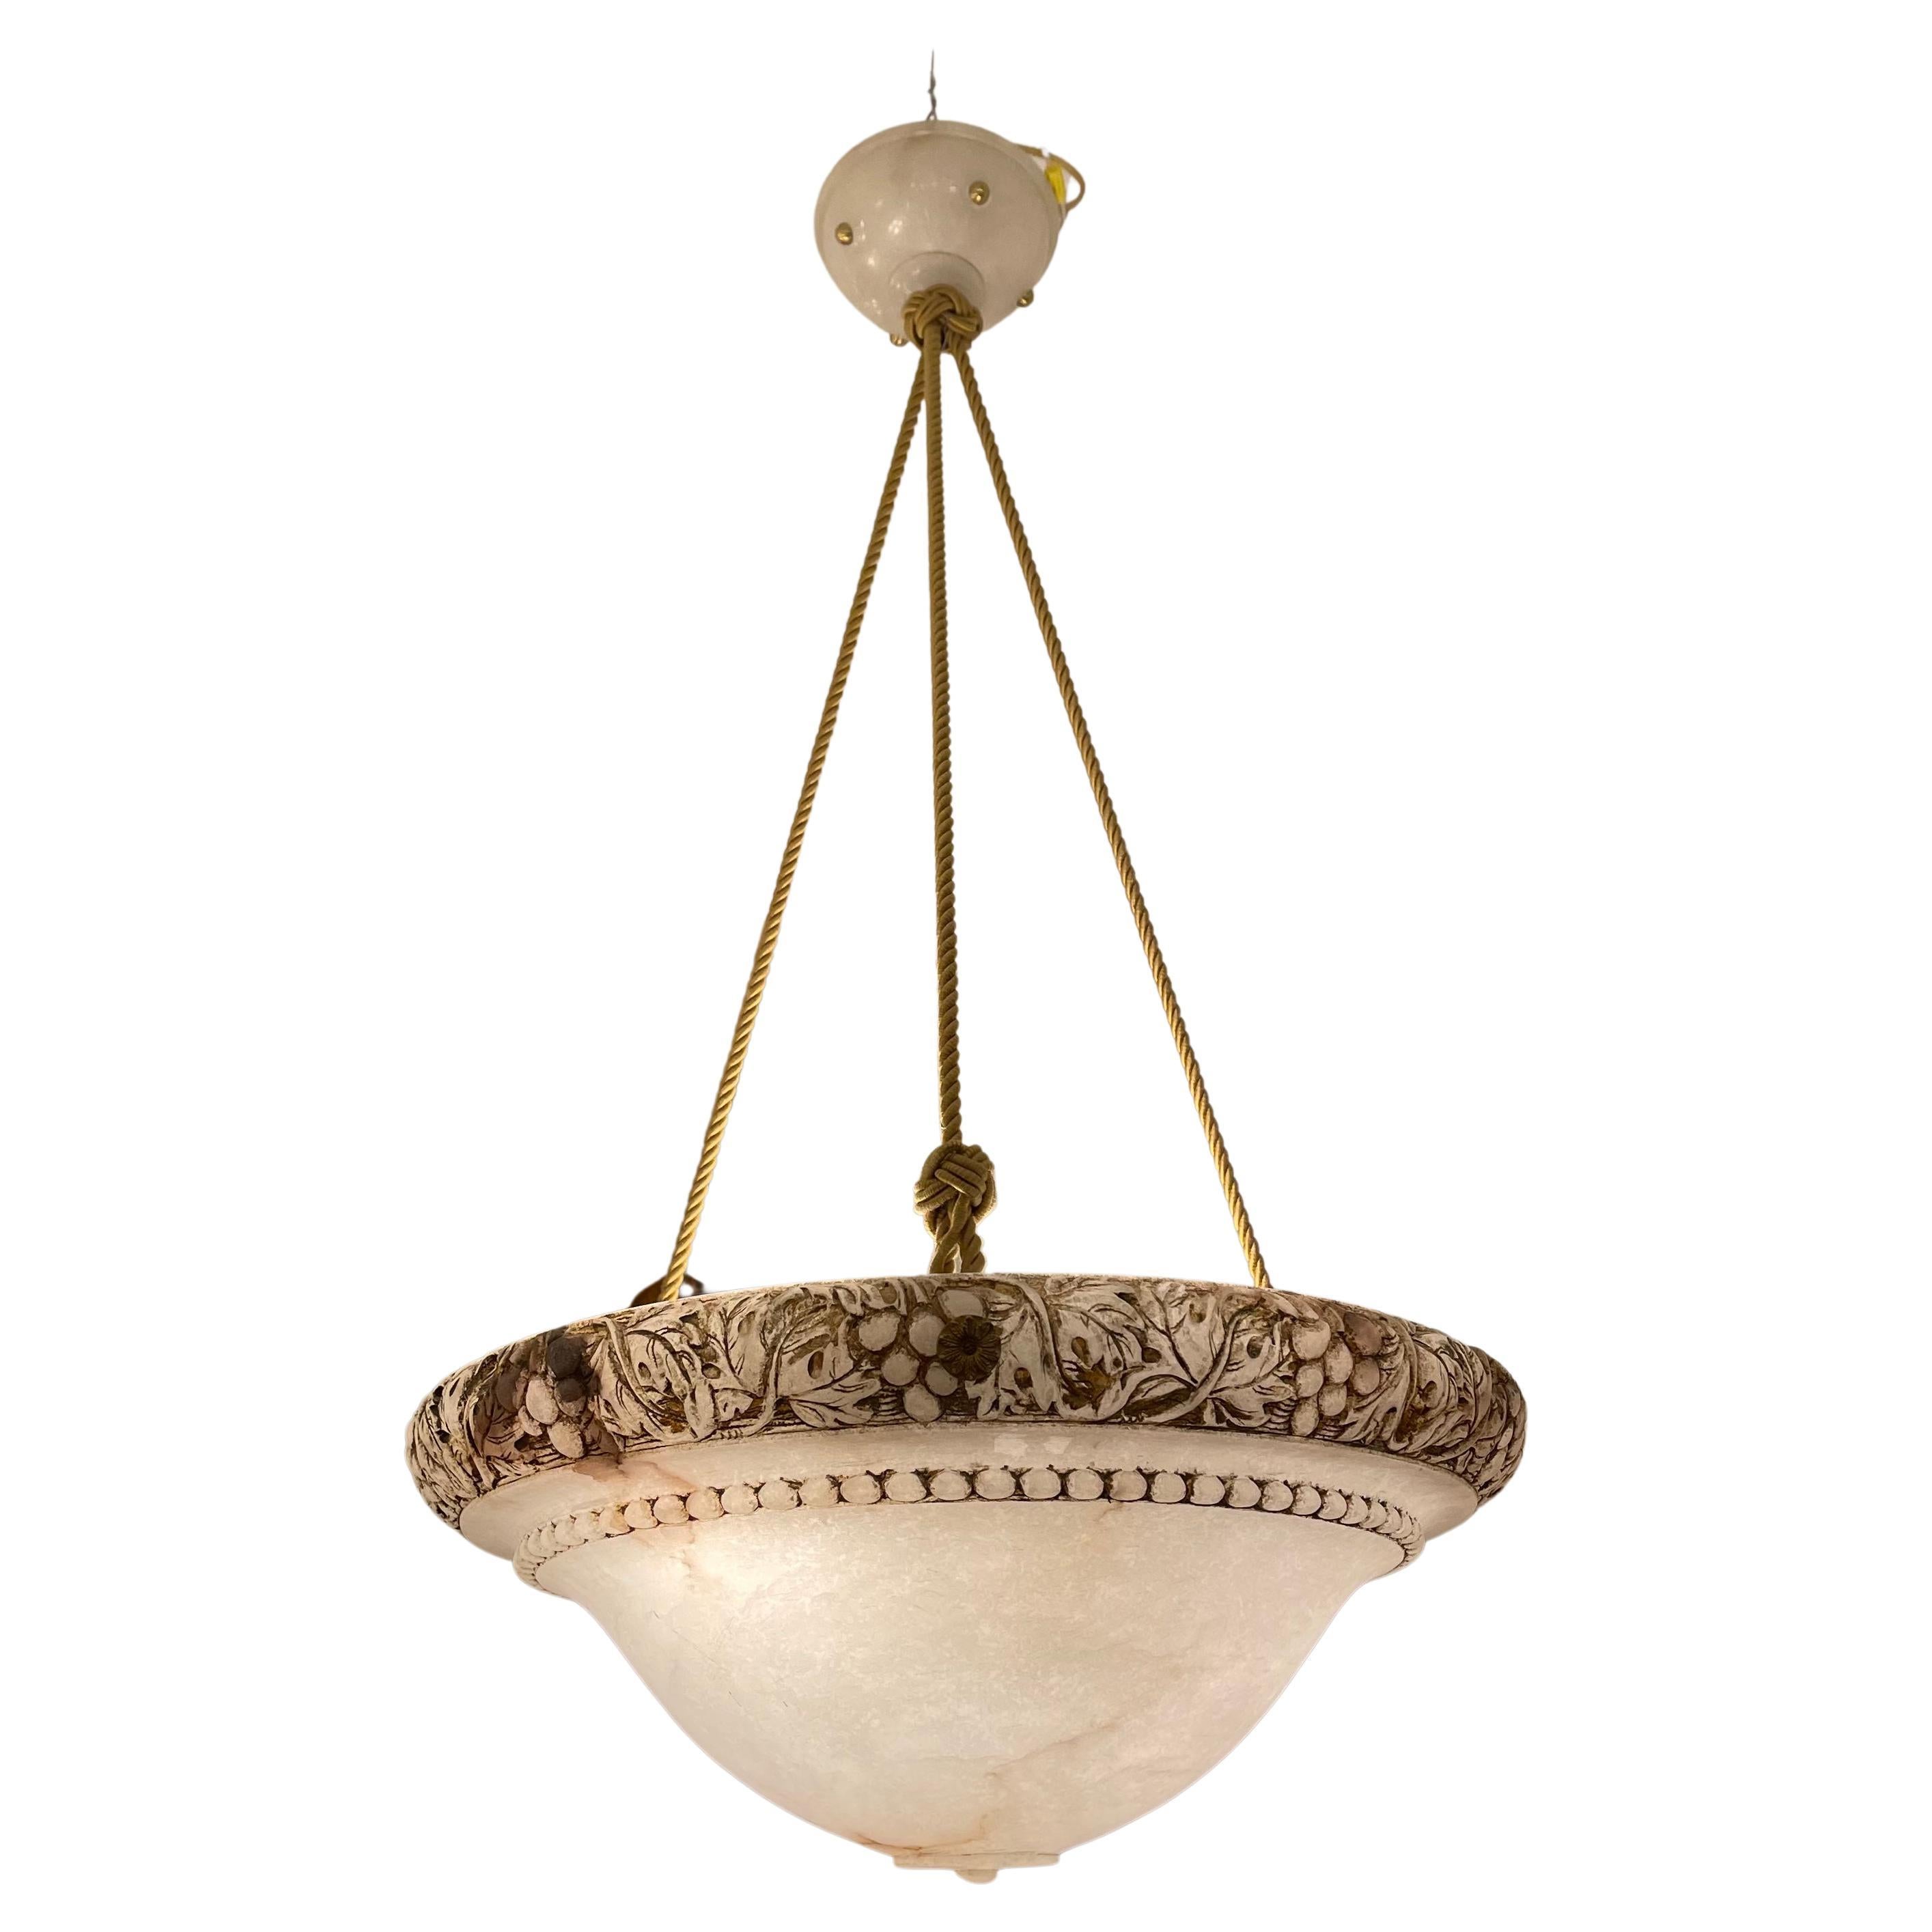 Carved from a single piece of white alabaster stone, this light fixture mounts three bulbs for soft and elegant light diffusion. The electrical wiring is concealed in silk ropes. A neo classical motif of a grapevine is carved in bas-relief on the